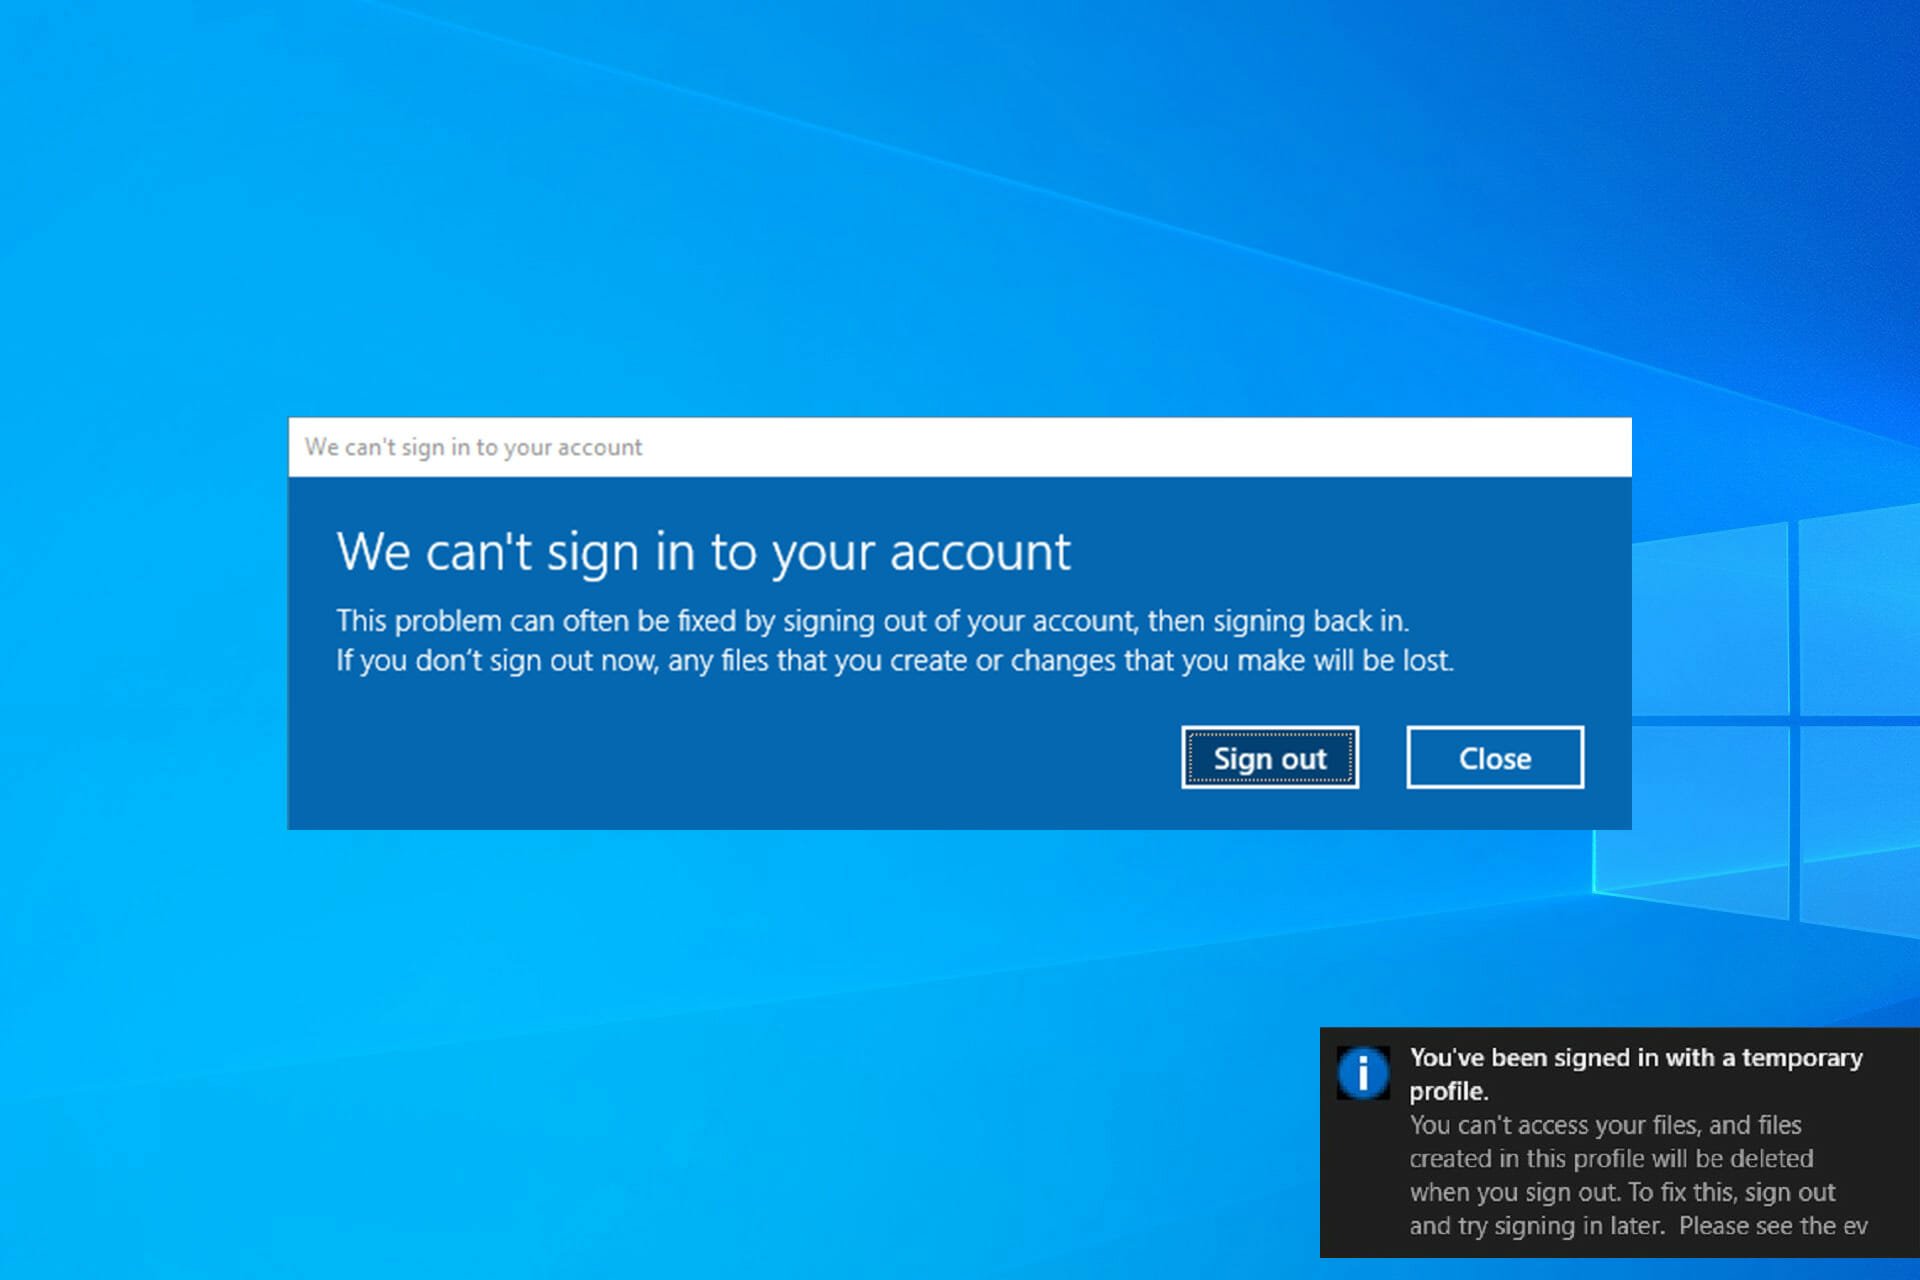 Signed in with a temporary profile error in Windows 10